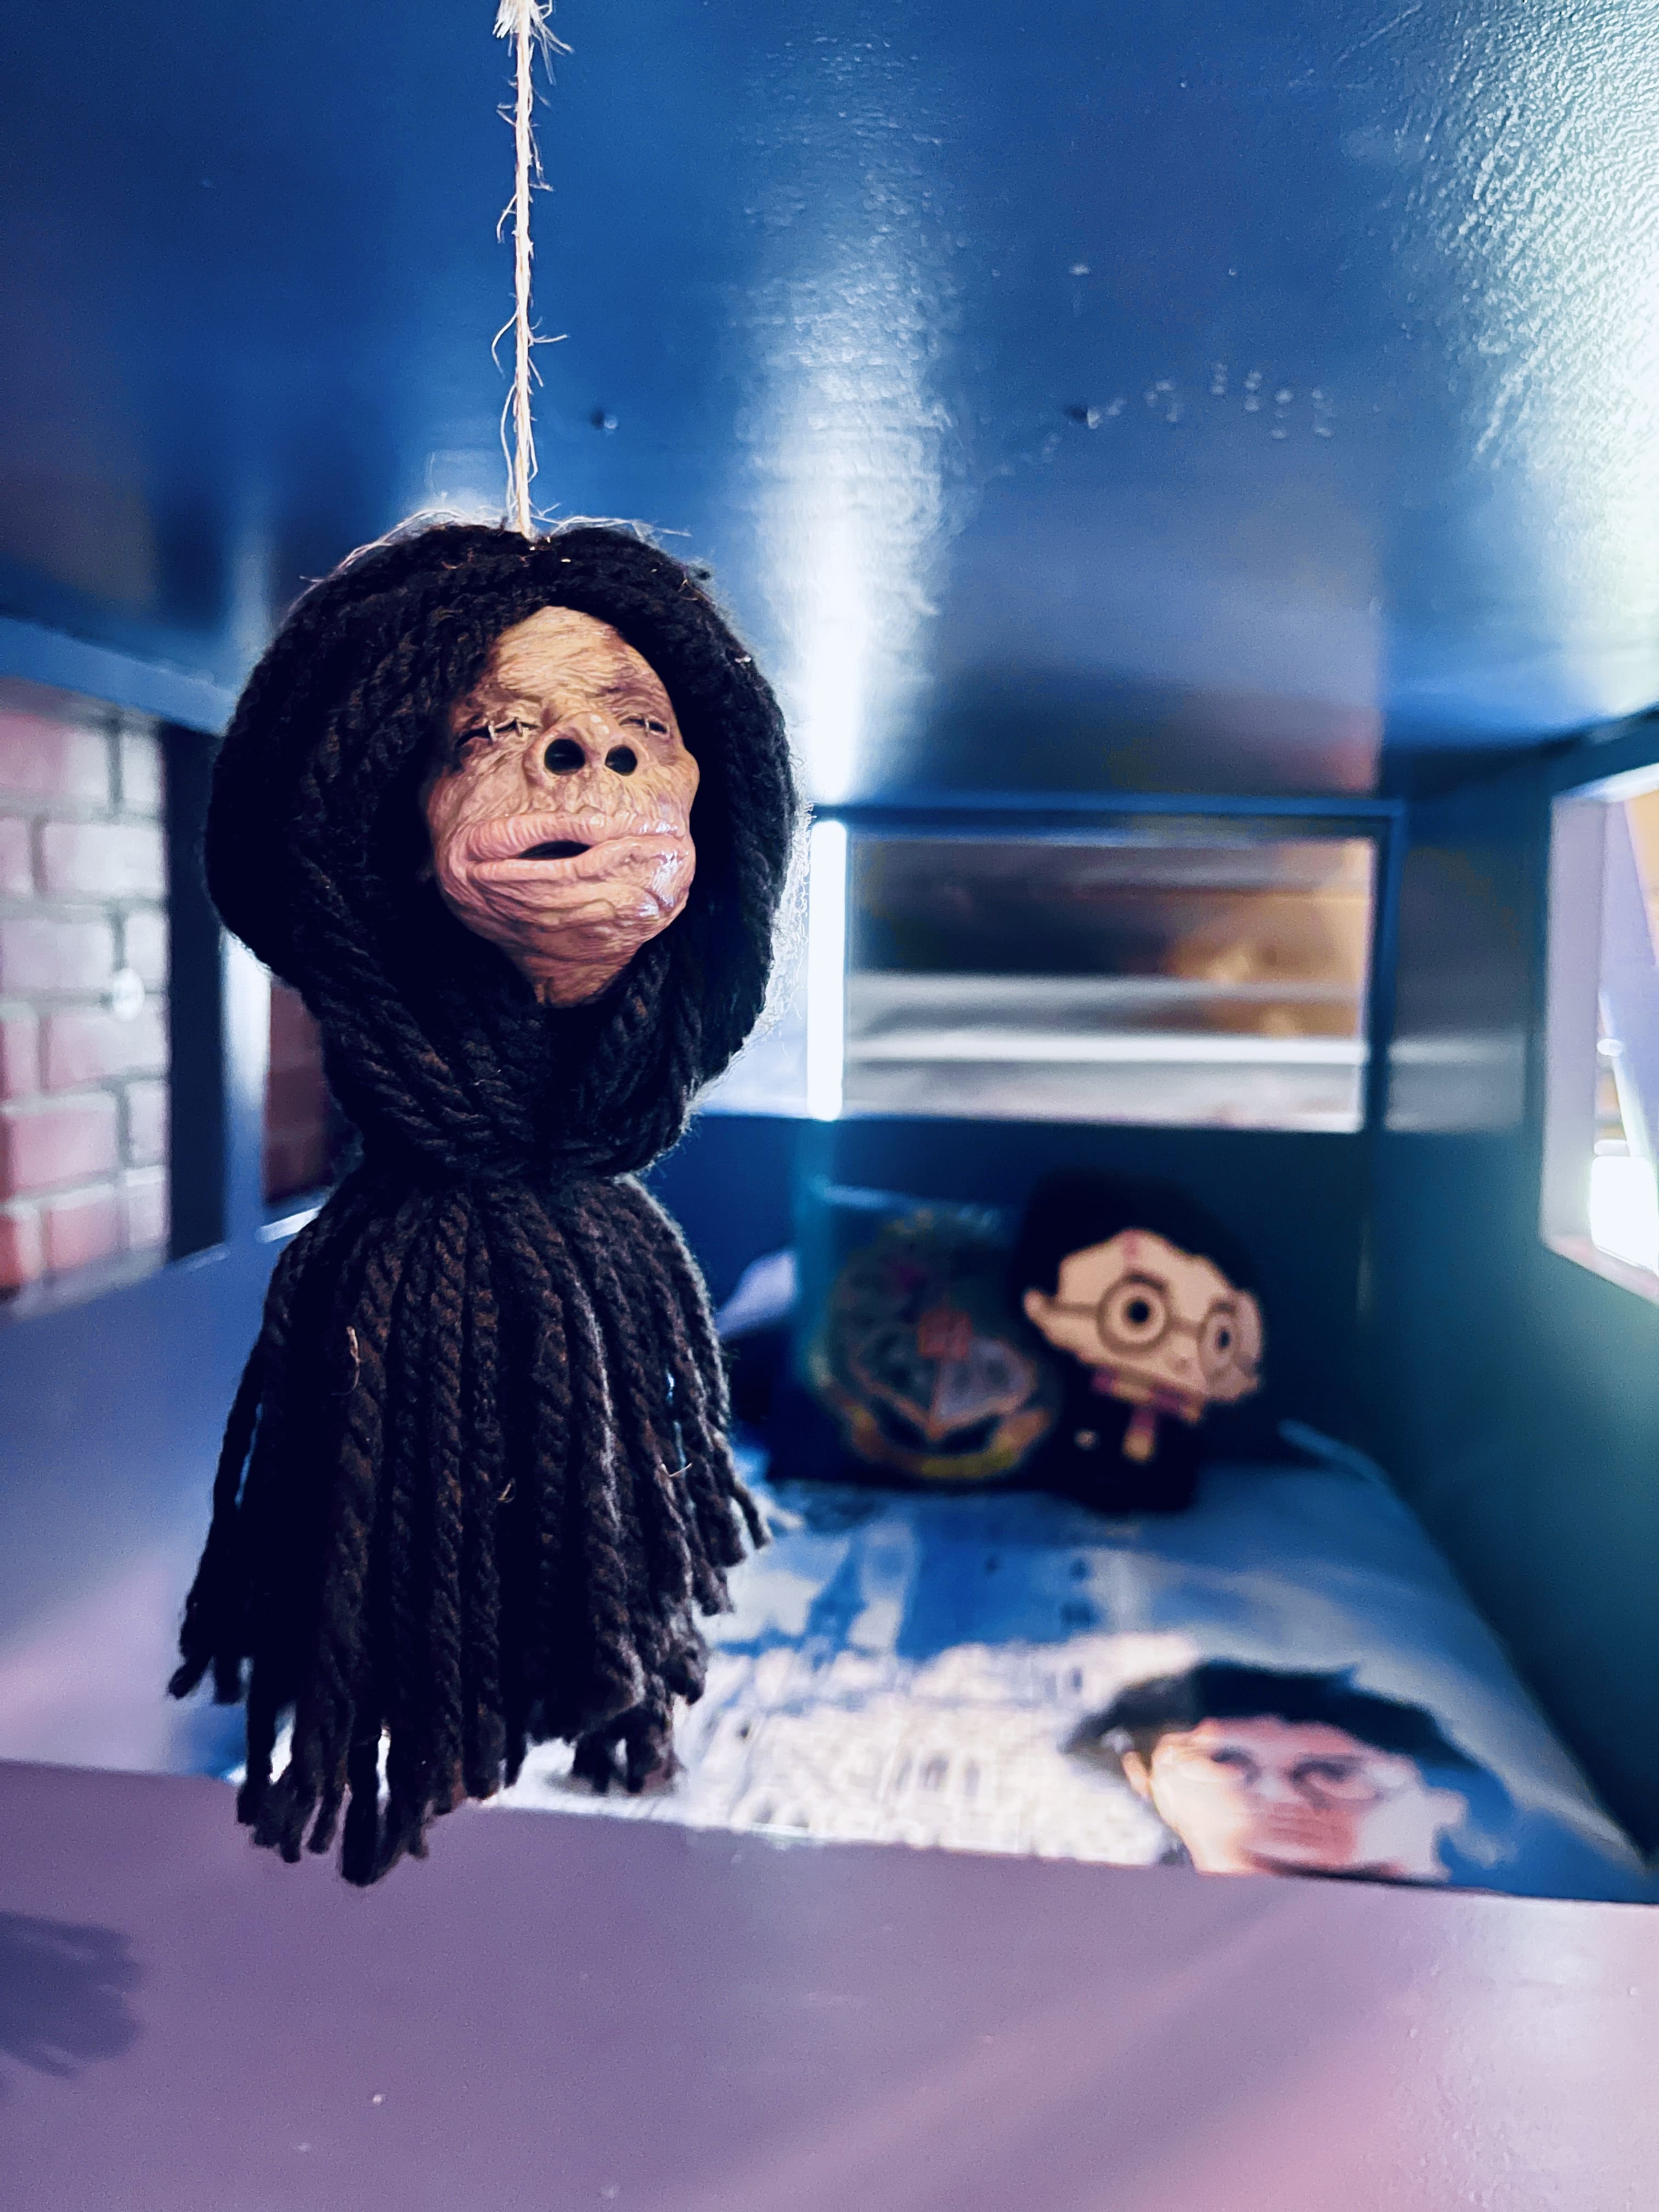 This cute shrunken head make fun commentary at the push of a button.